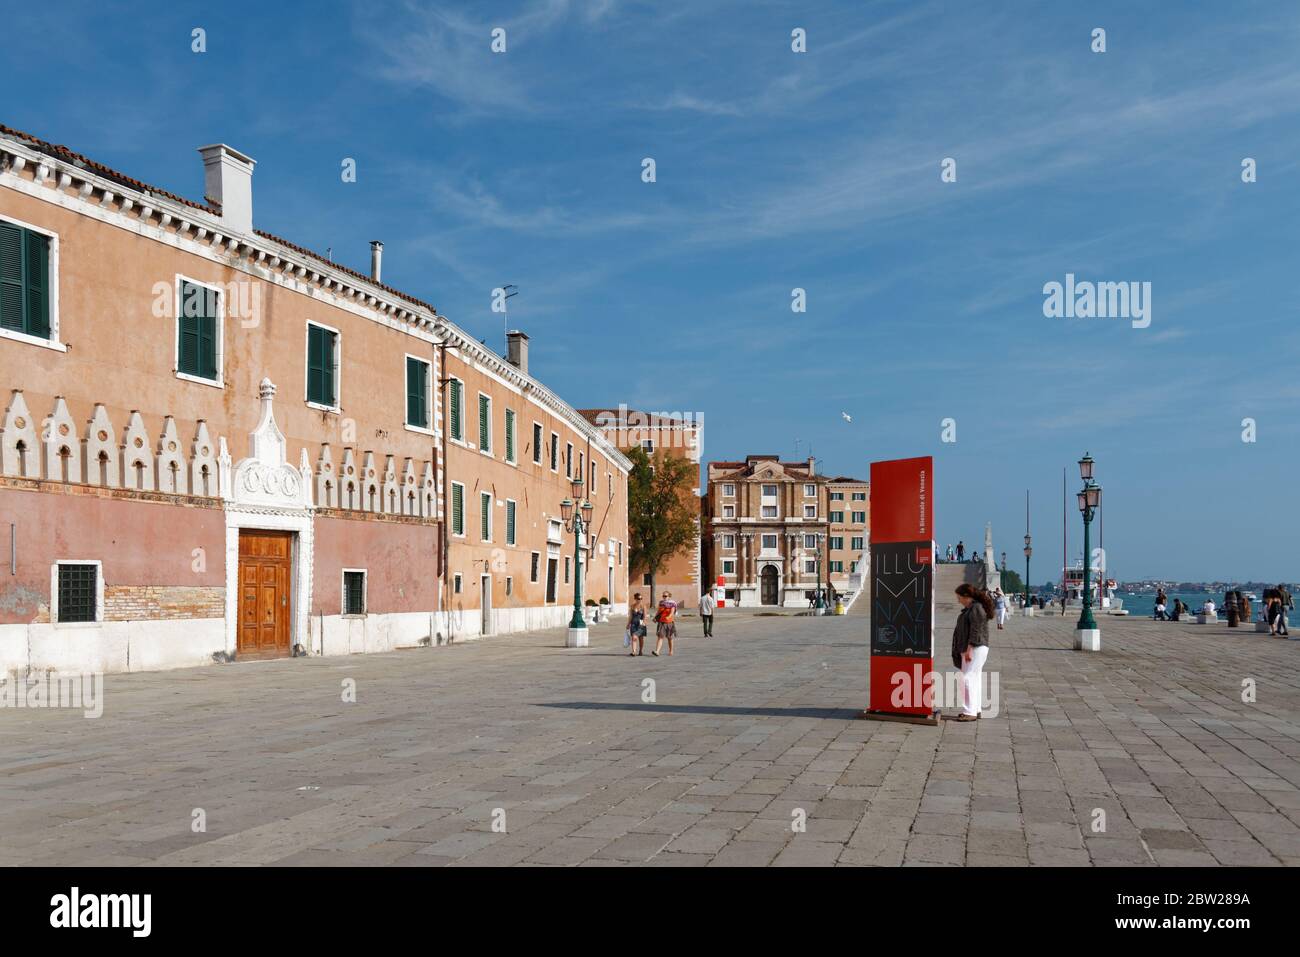 Sep 23/2011: Waterfront near the Arsenale stop of the vaporetto. One person is reading the Biennale plan. Stock Photo